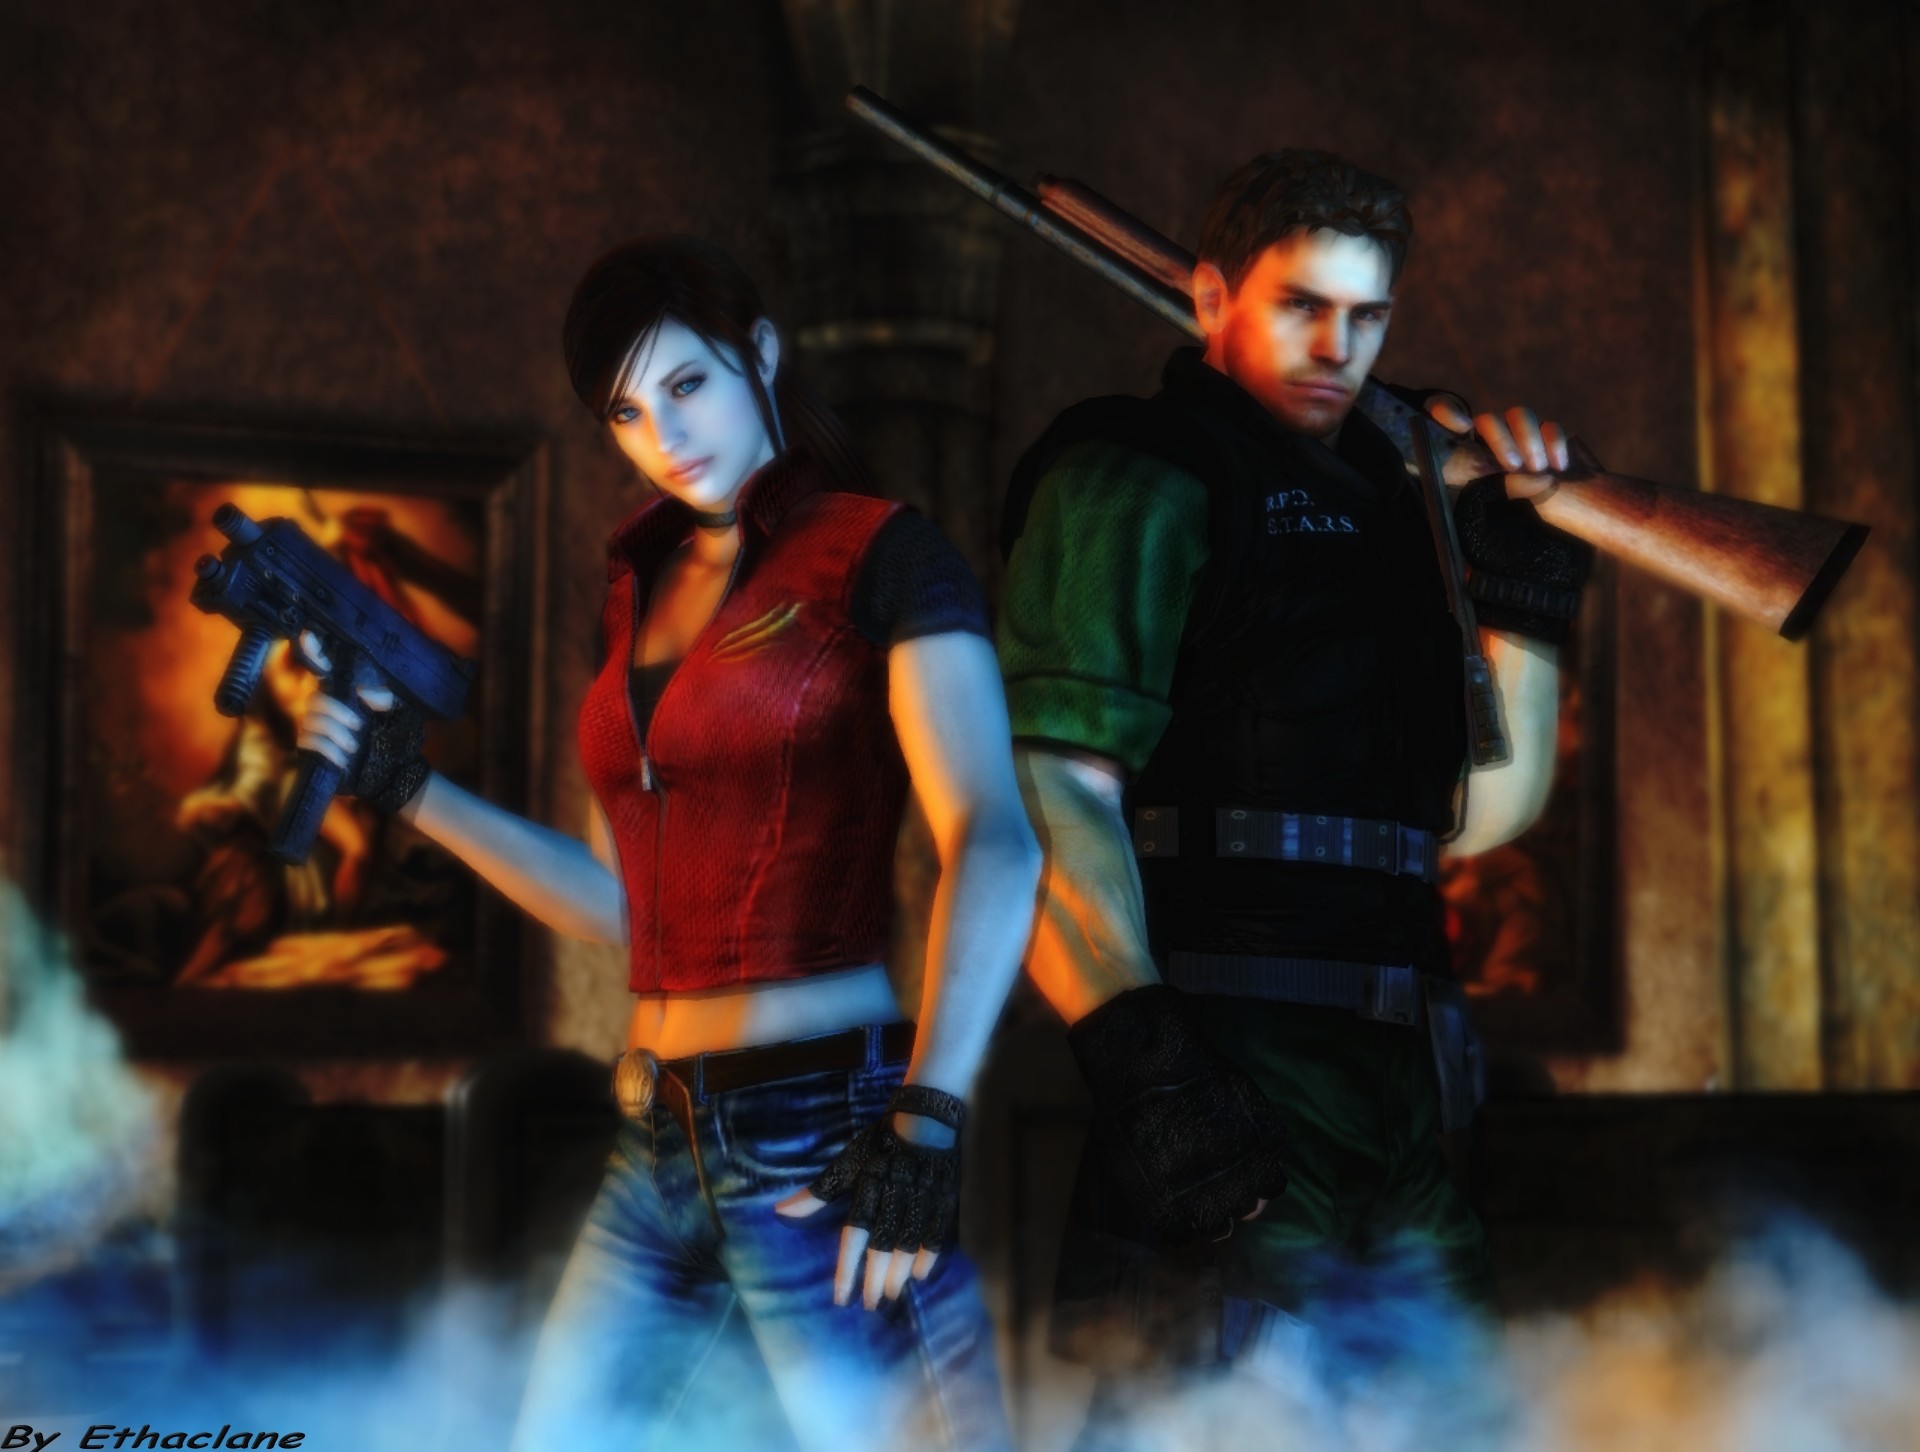 1920x1452 Chris And Claire Redfield Wallpaper Resident evil wallpaper chris 